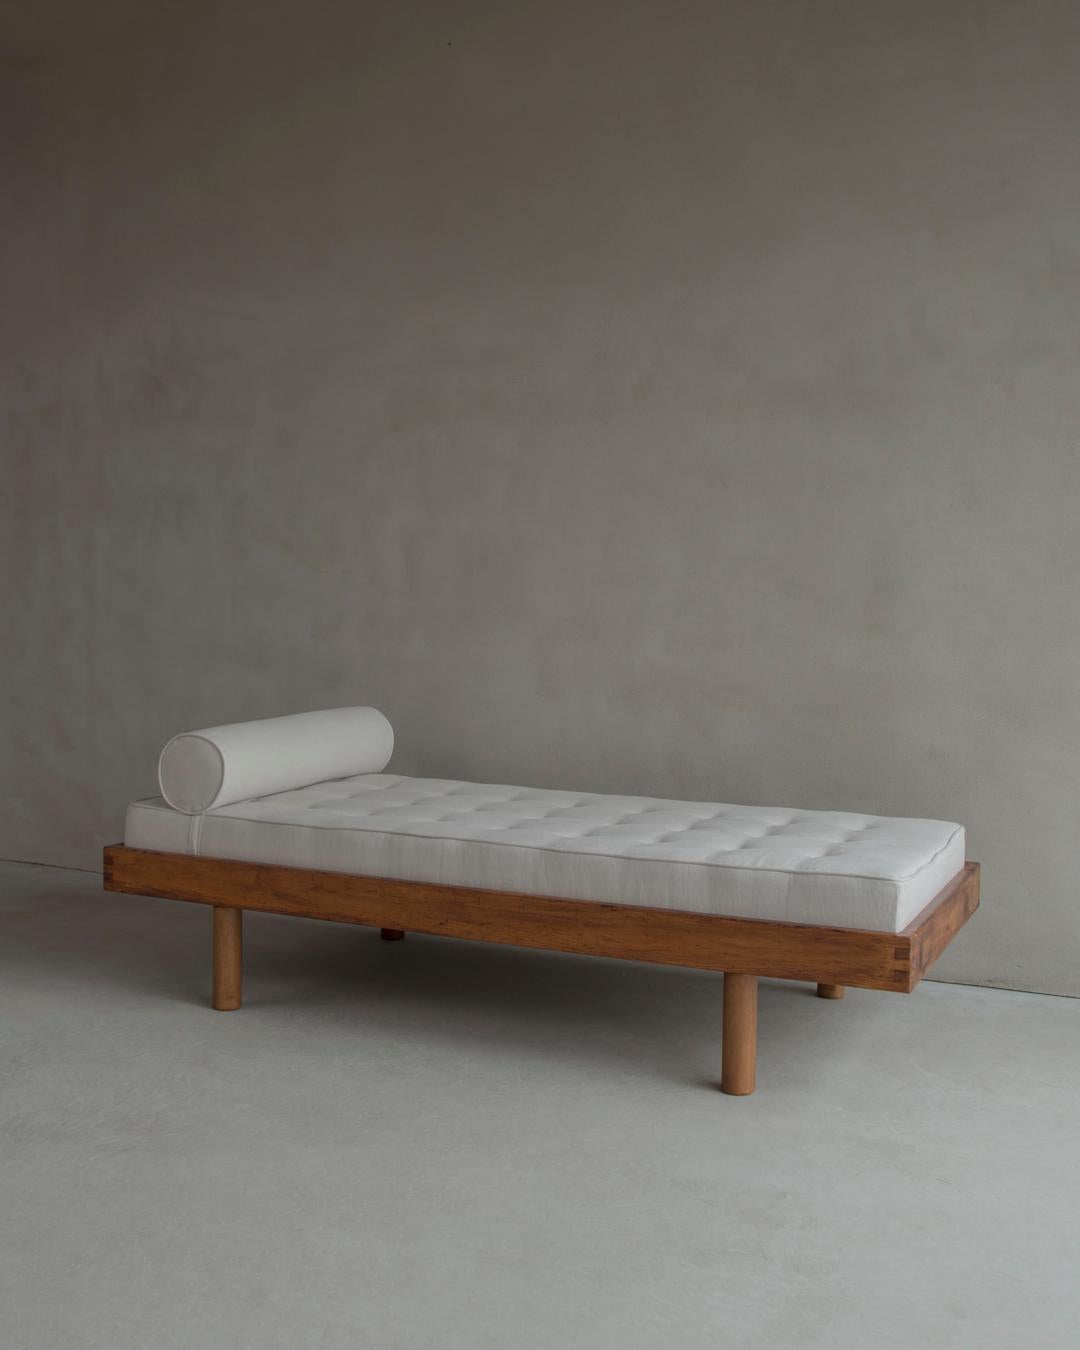 Fabric Charlotte Perriand, Daybed for Les Arc, Pine, 1970s